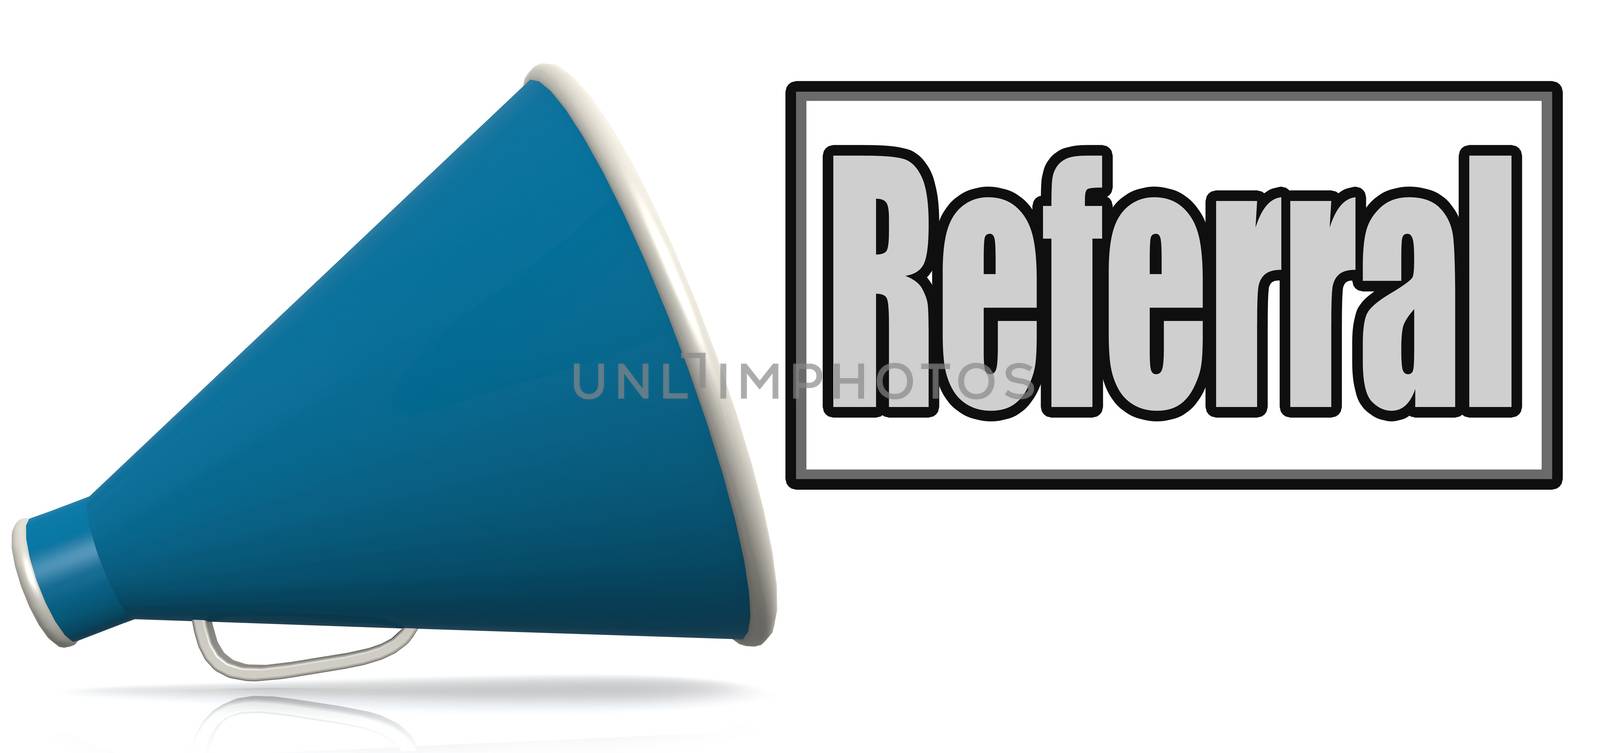 Referral word on blue megaphone by tang90246